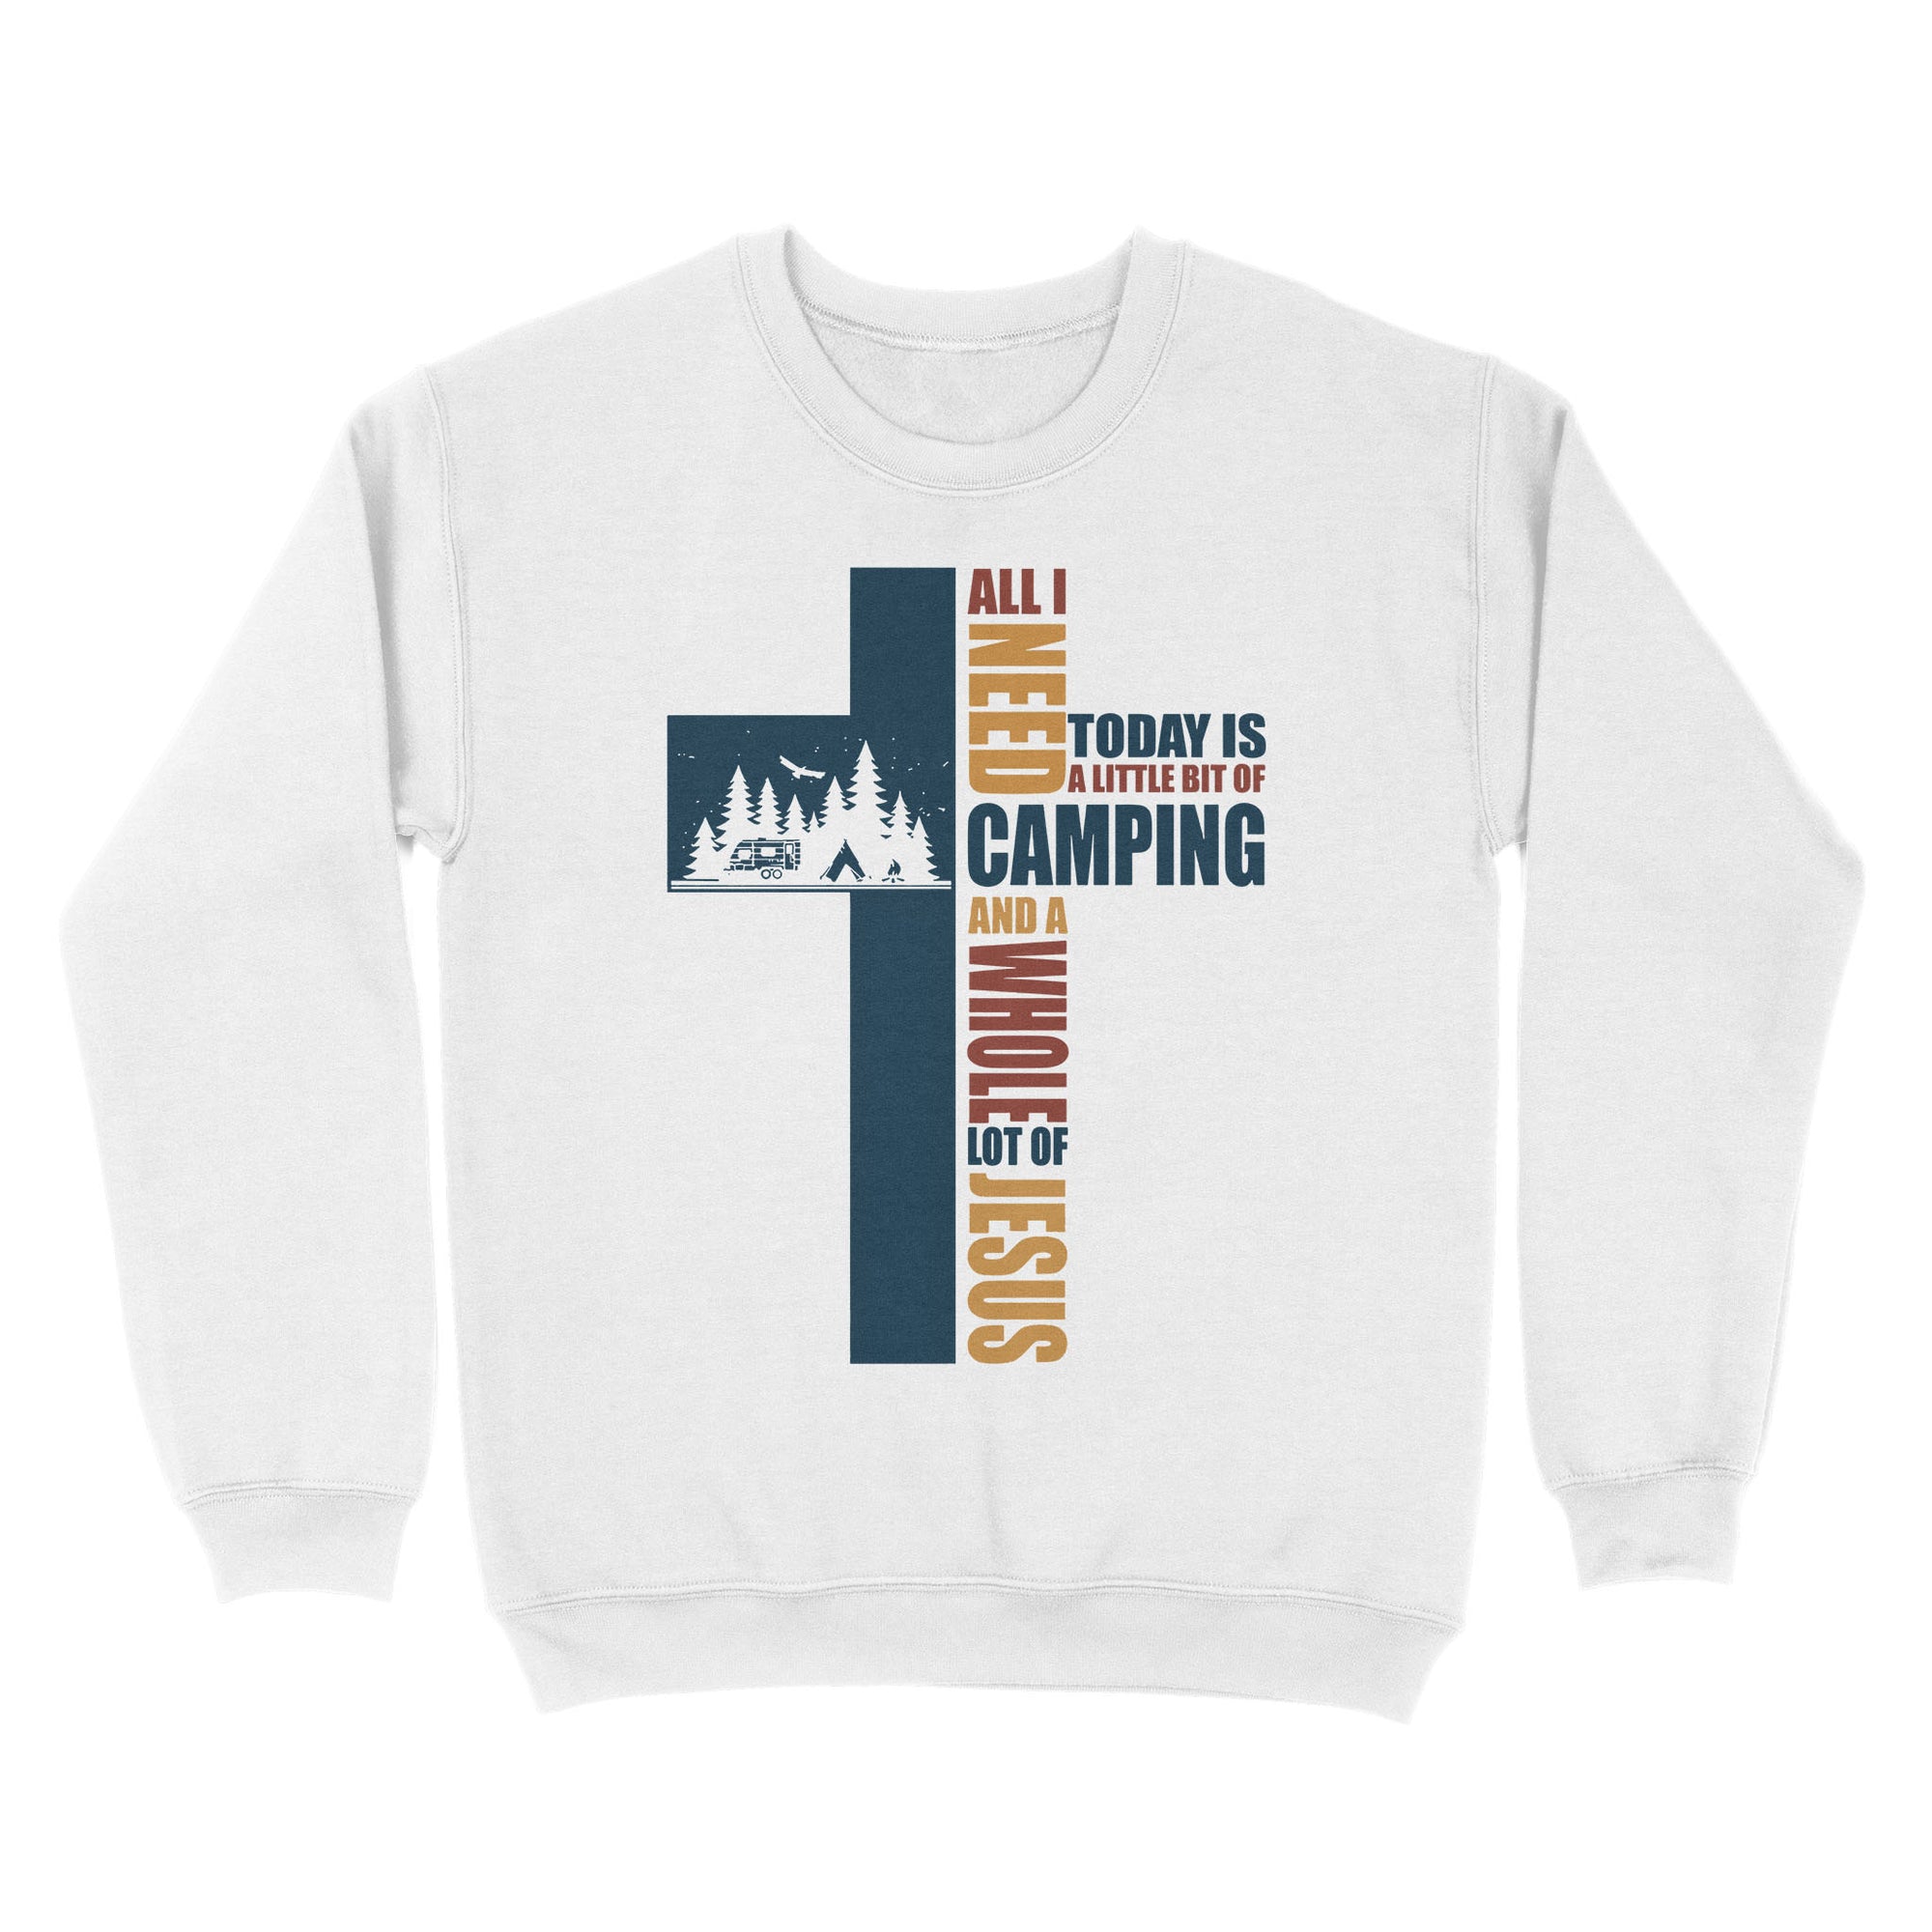 All I Need Today Is A Little Bit Of Camping And A Whole Lot Of Jesus Standard Crew Neck Sweatshirt